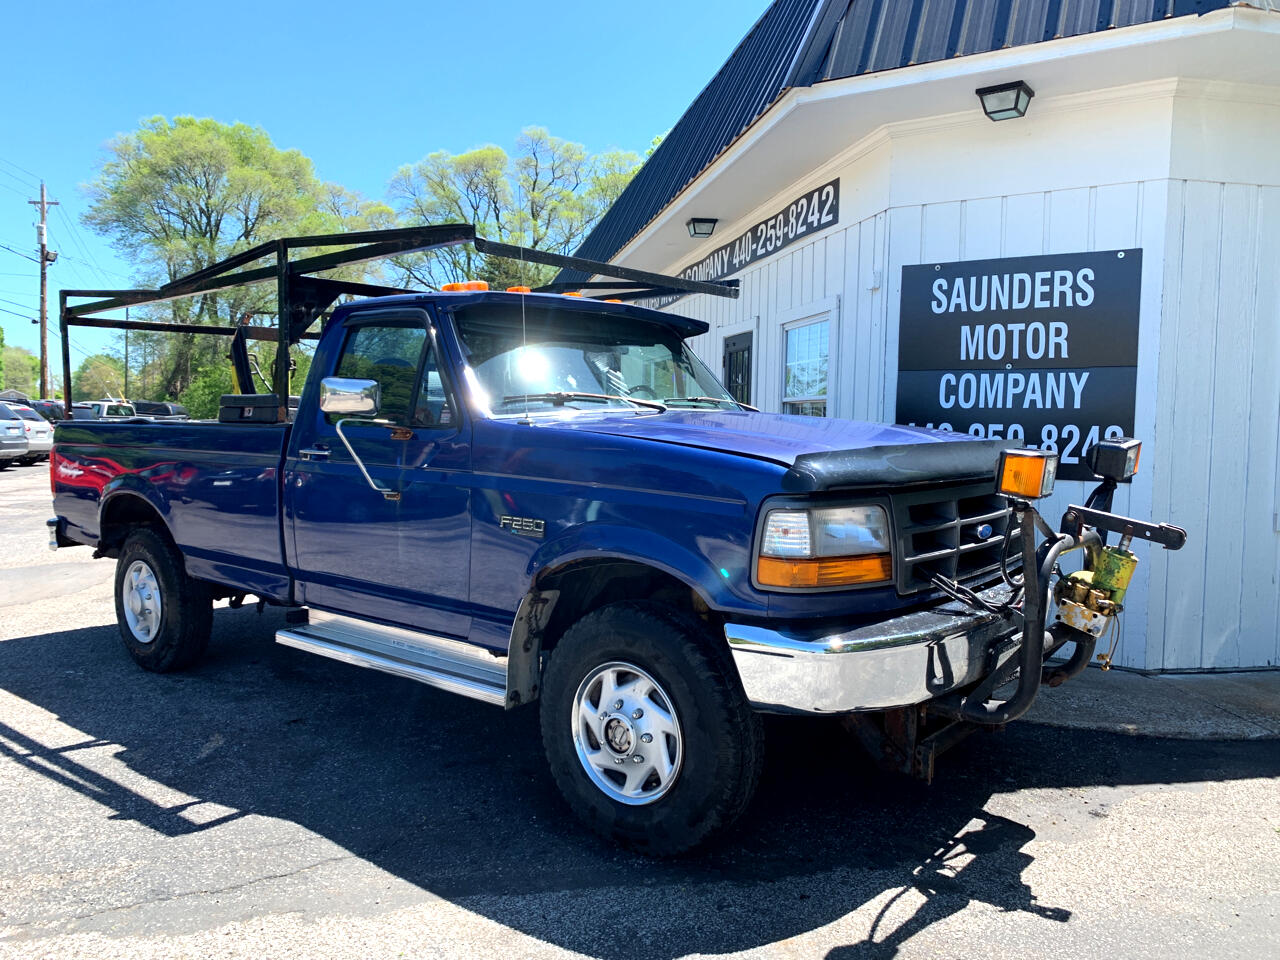 Used 1996 Ford F-250 XL HD Reg. Cab 4WD for Sale in Perry OH 44081 1996 Ford F250 7.3 Powerstroke Towing Capacity